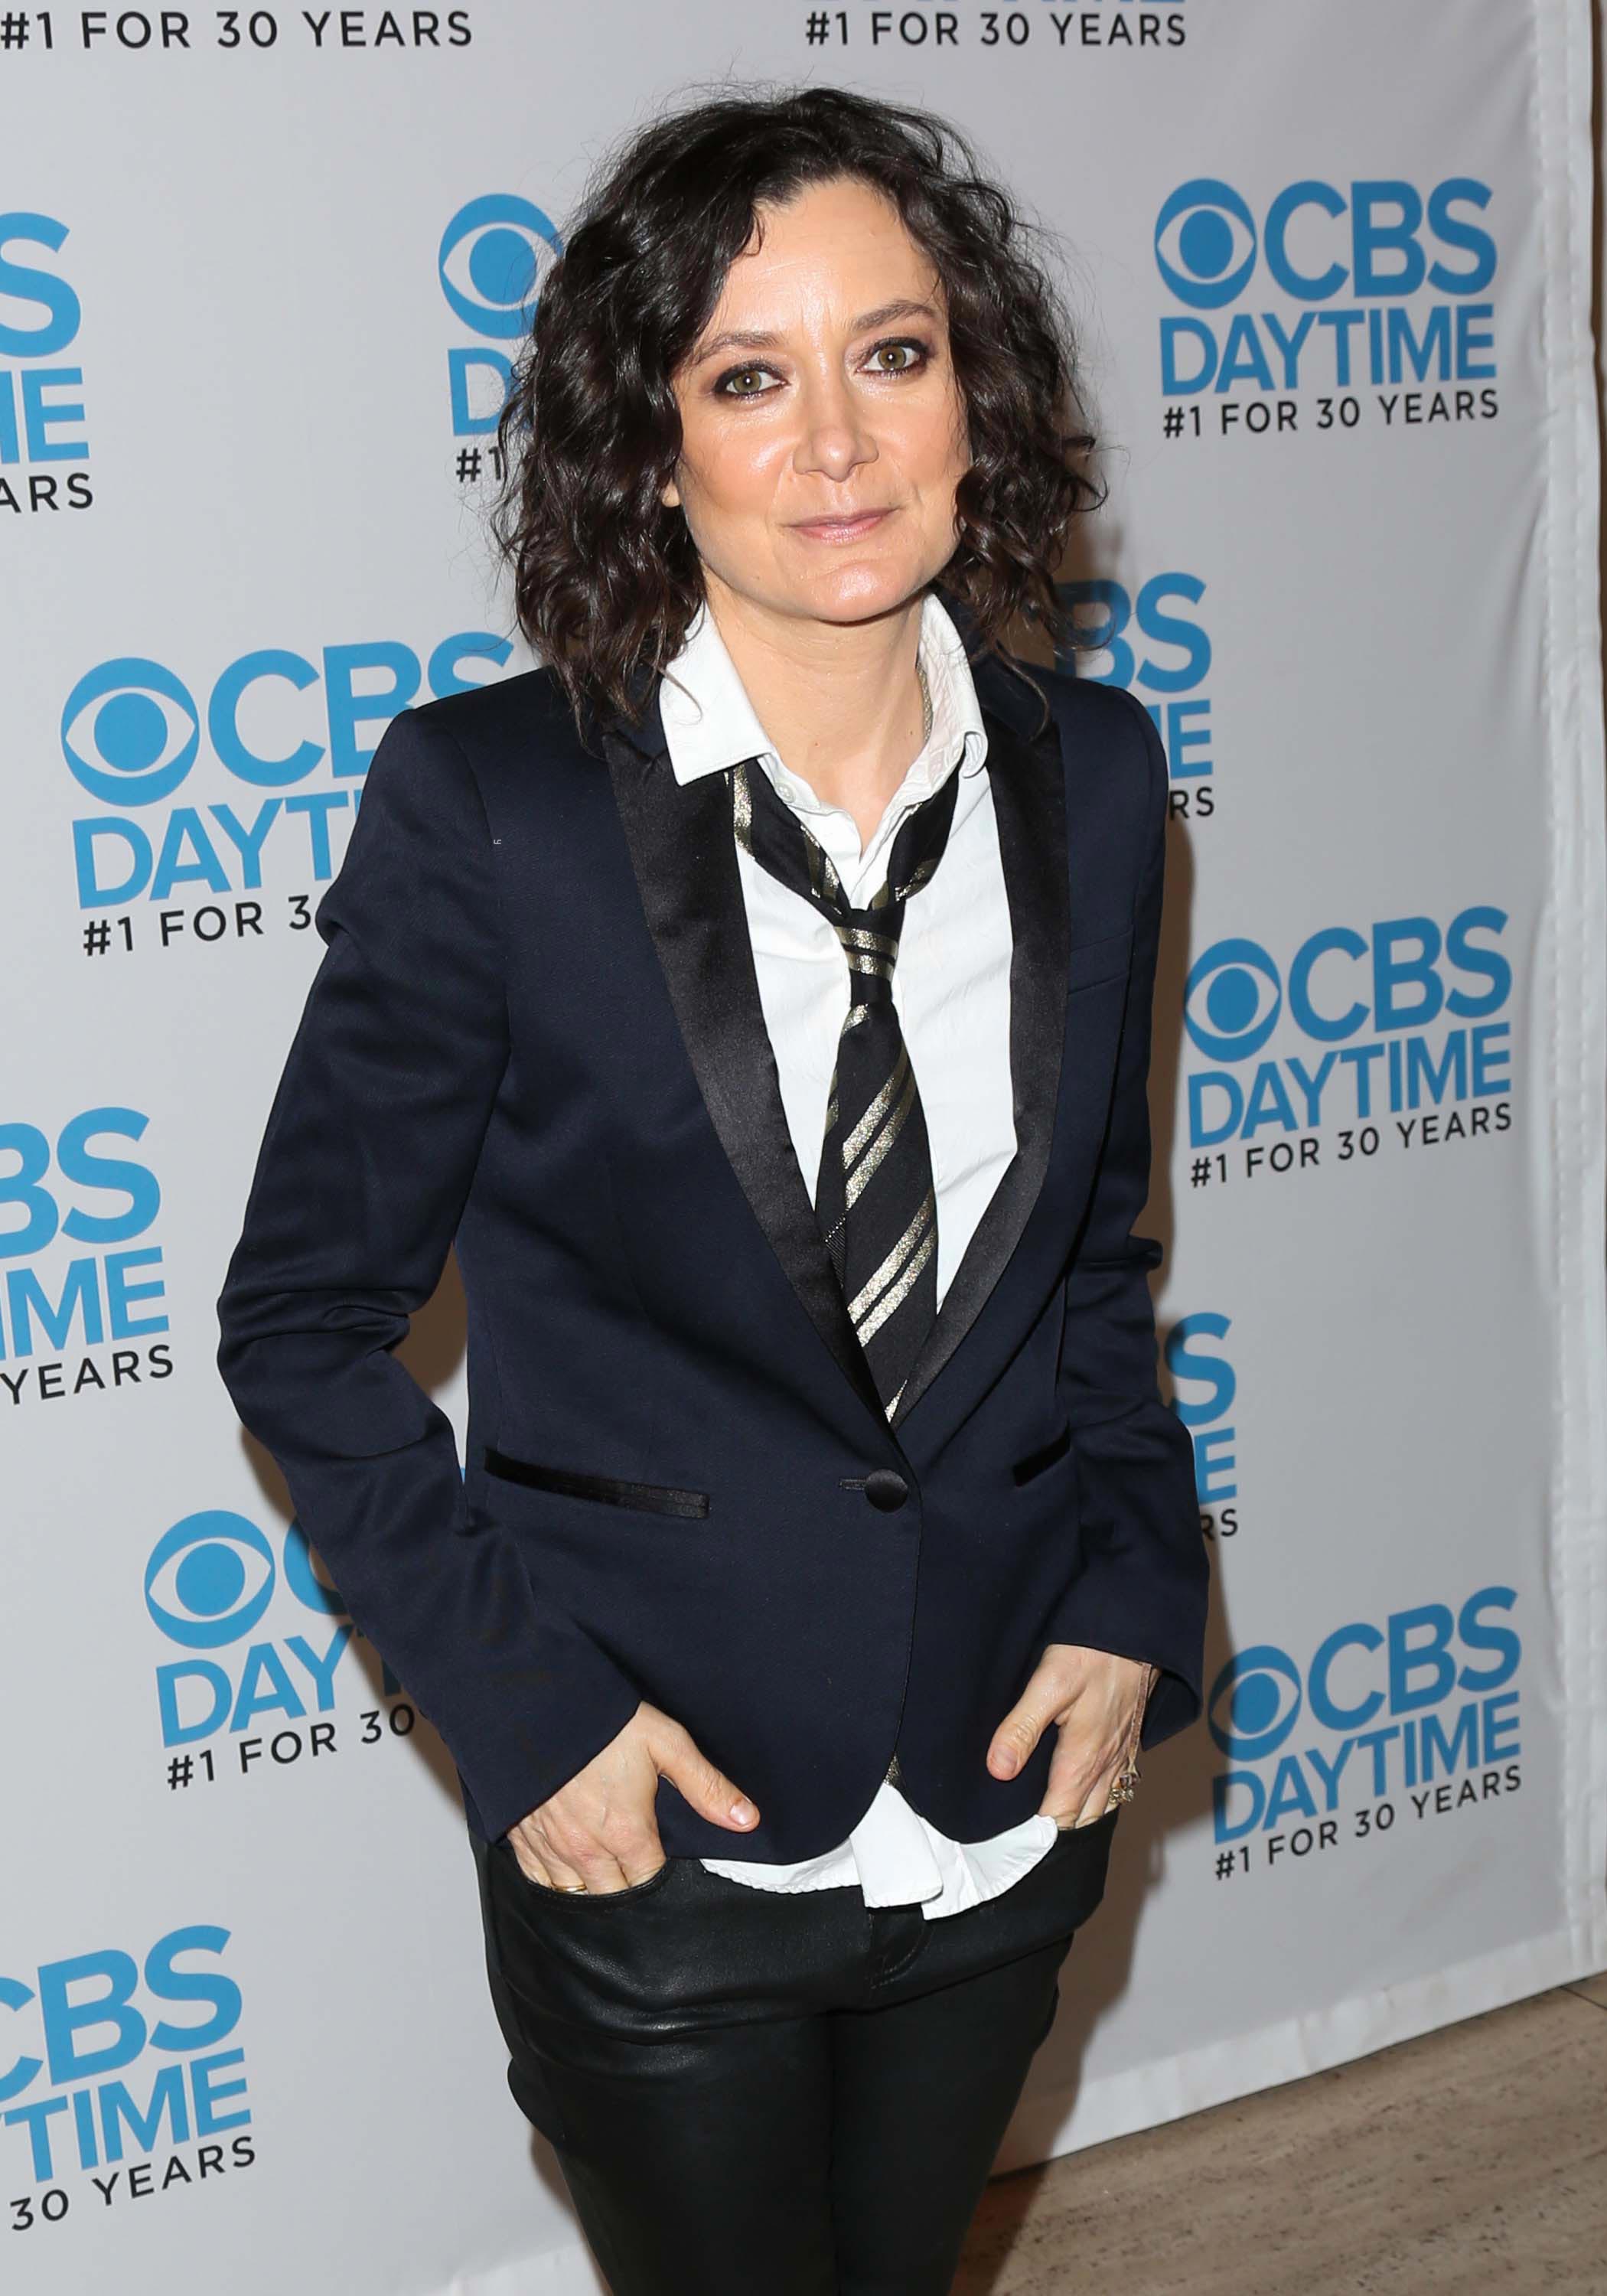 Sara Gilbert attends the panel for The Talk presented by CBS Daytime